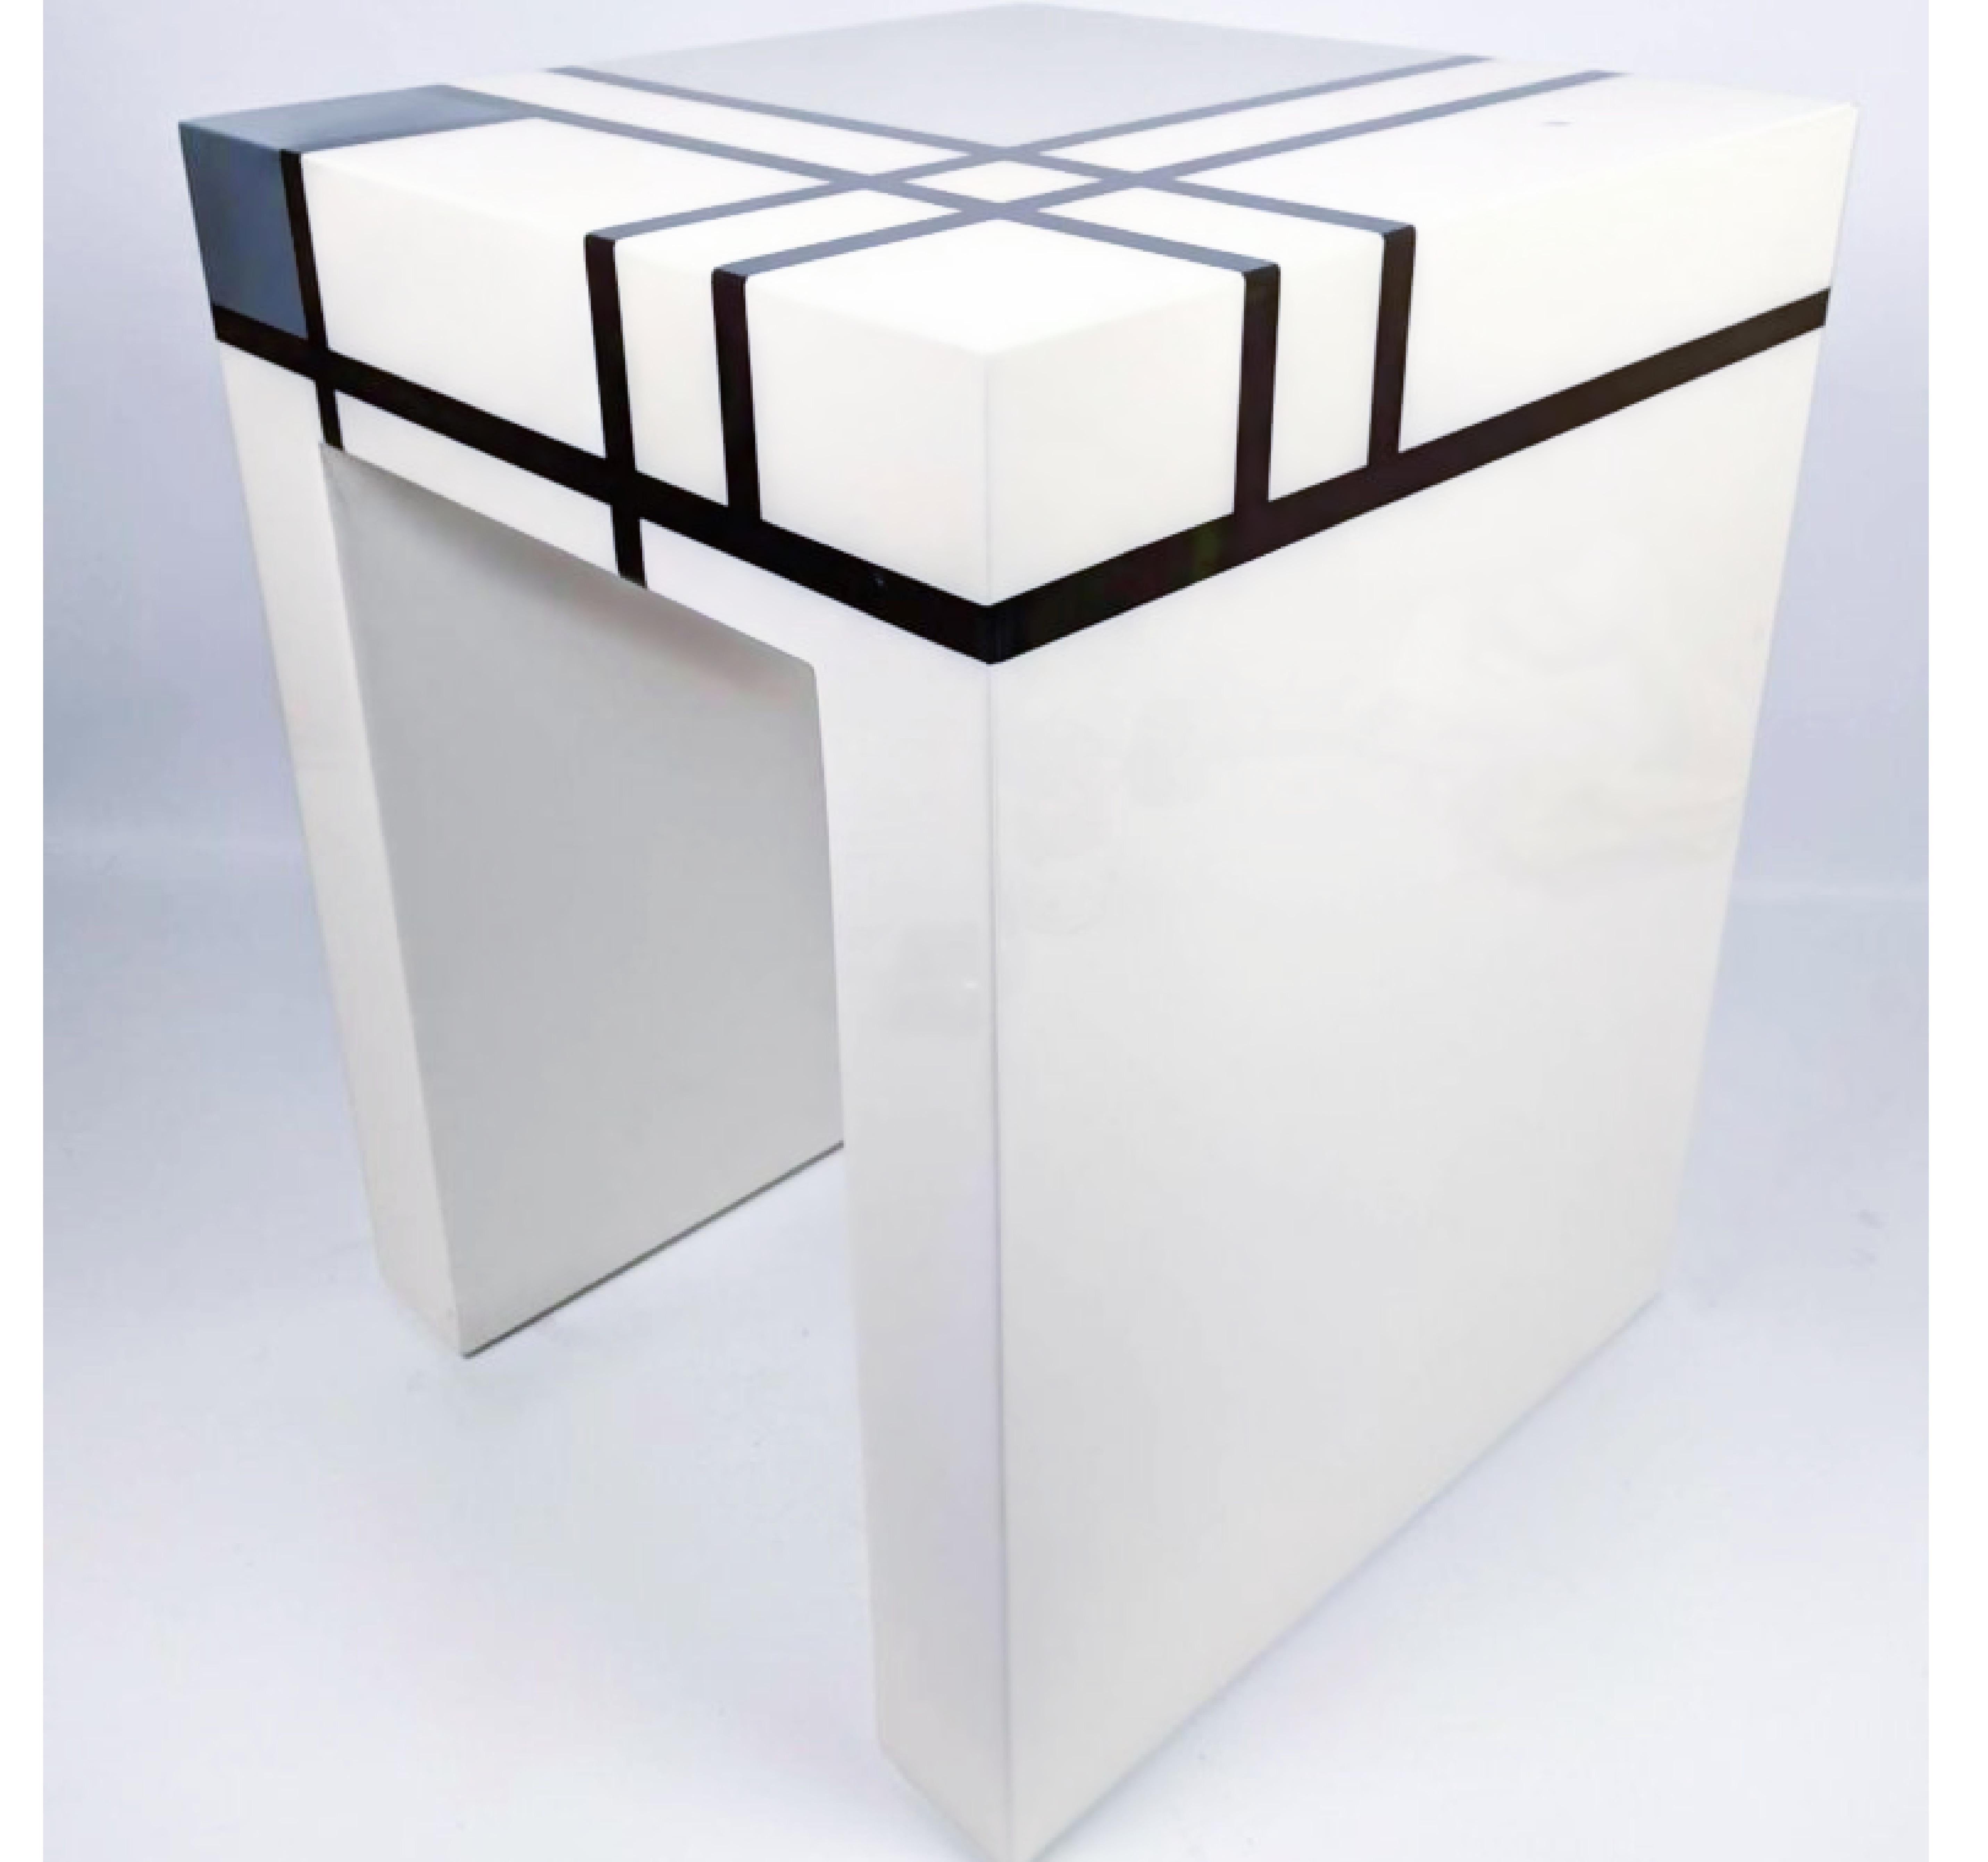 American Mondrian Limited Edition Hand-Lacquered Cube Table, Barneys New York, 2007